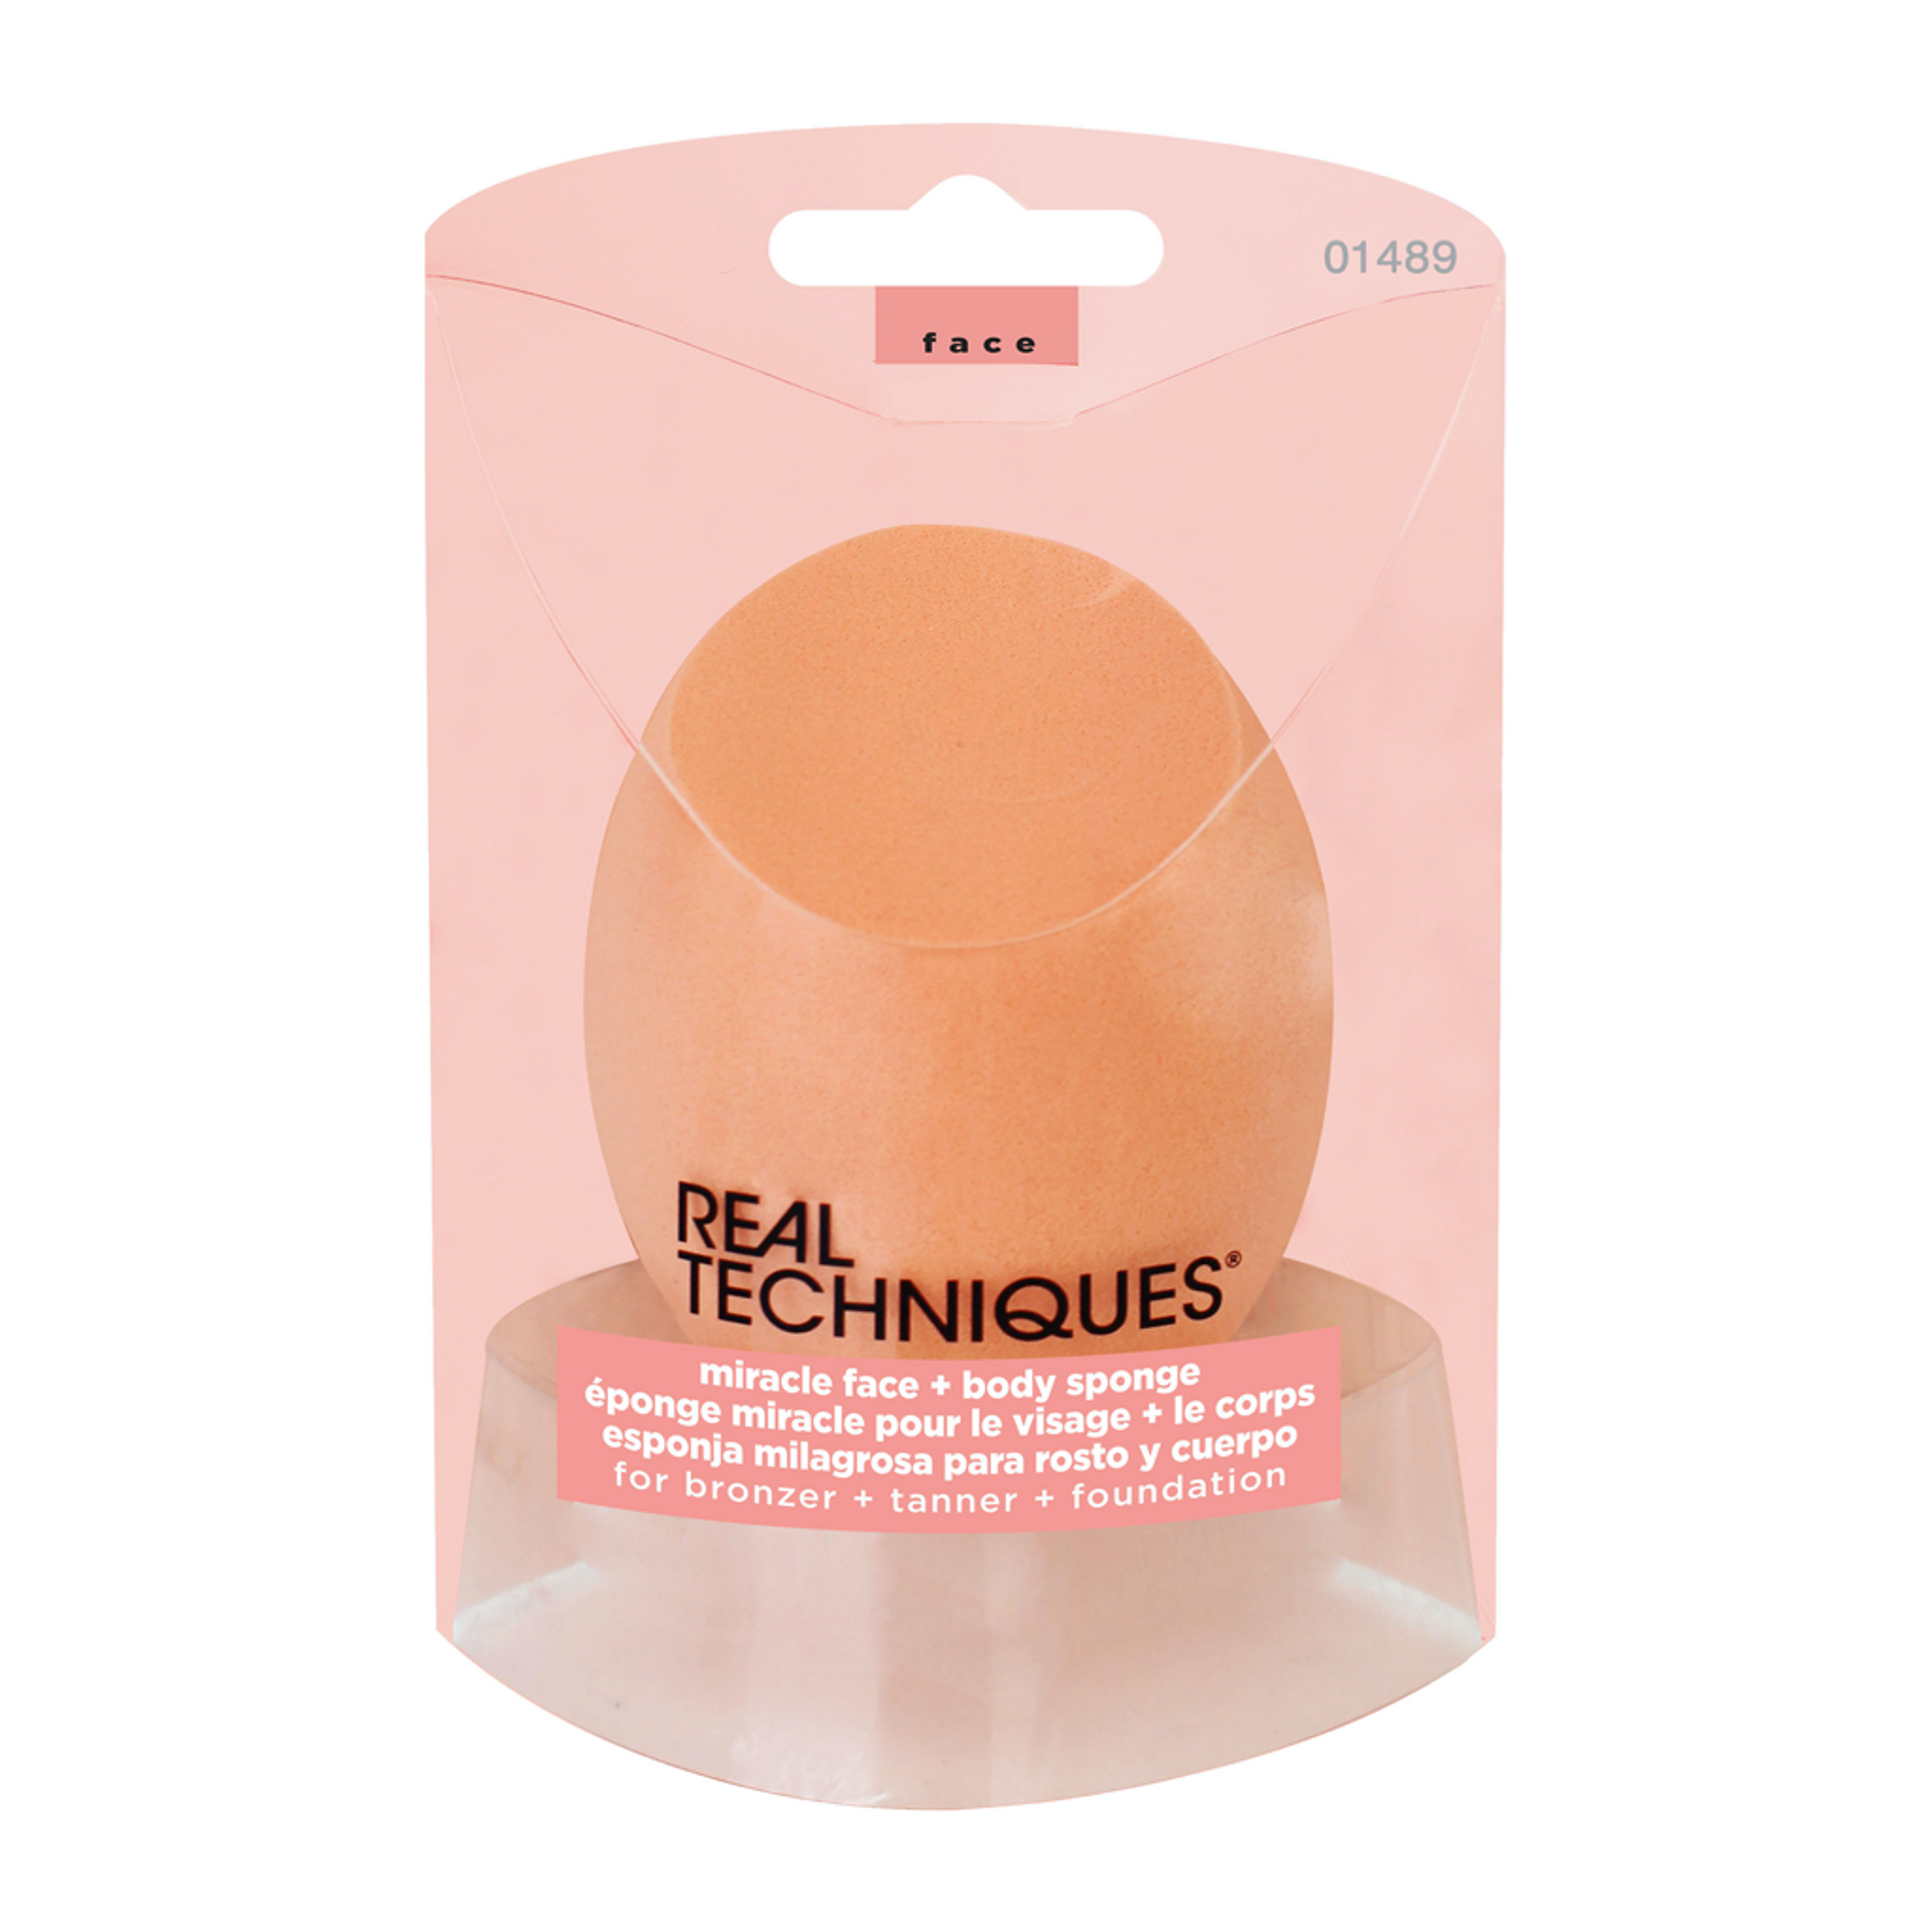 Real Techniques Miracle Face&body Complexion Sponge 1